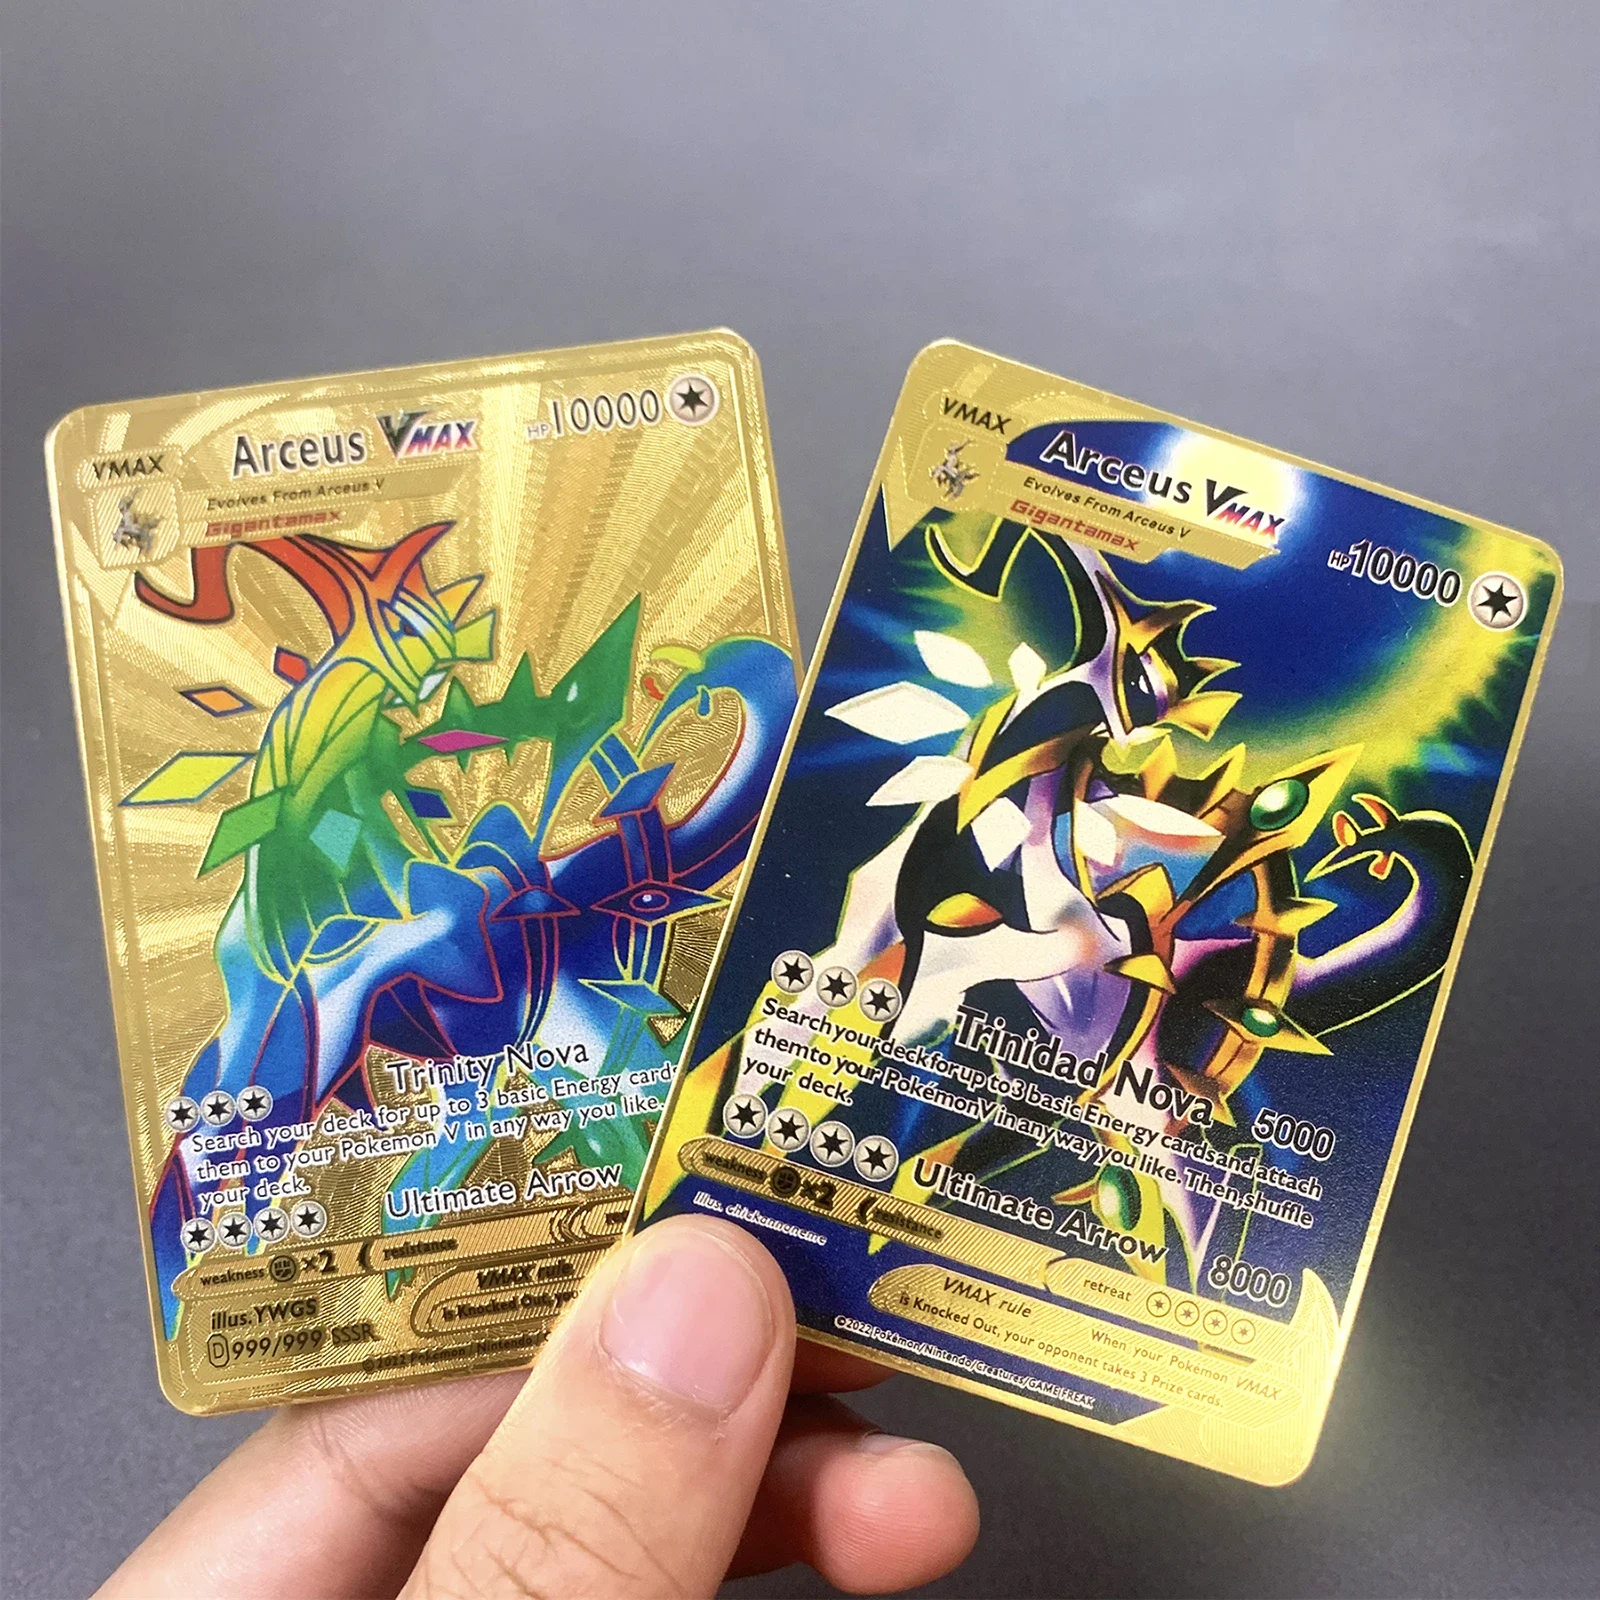 

10000 Point Arceus Vmax Gx Pokemon Metal Cards Diy Pikachu Charizard Gold Card Limited Edition Kids Game Collection Cards Gift